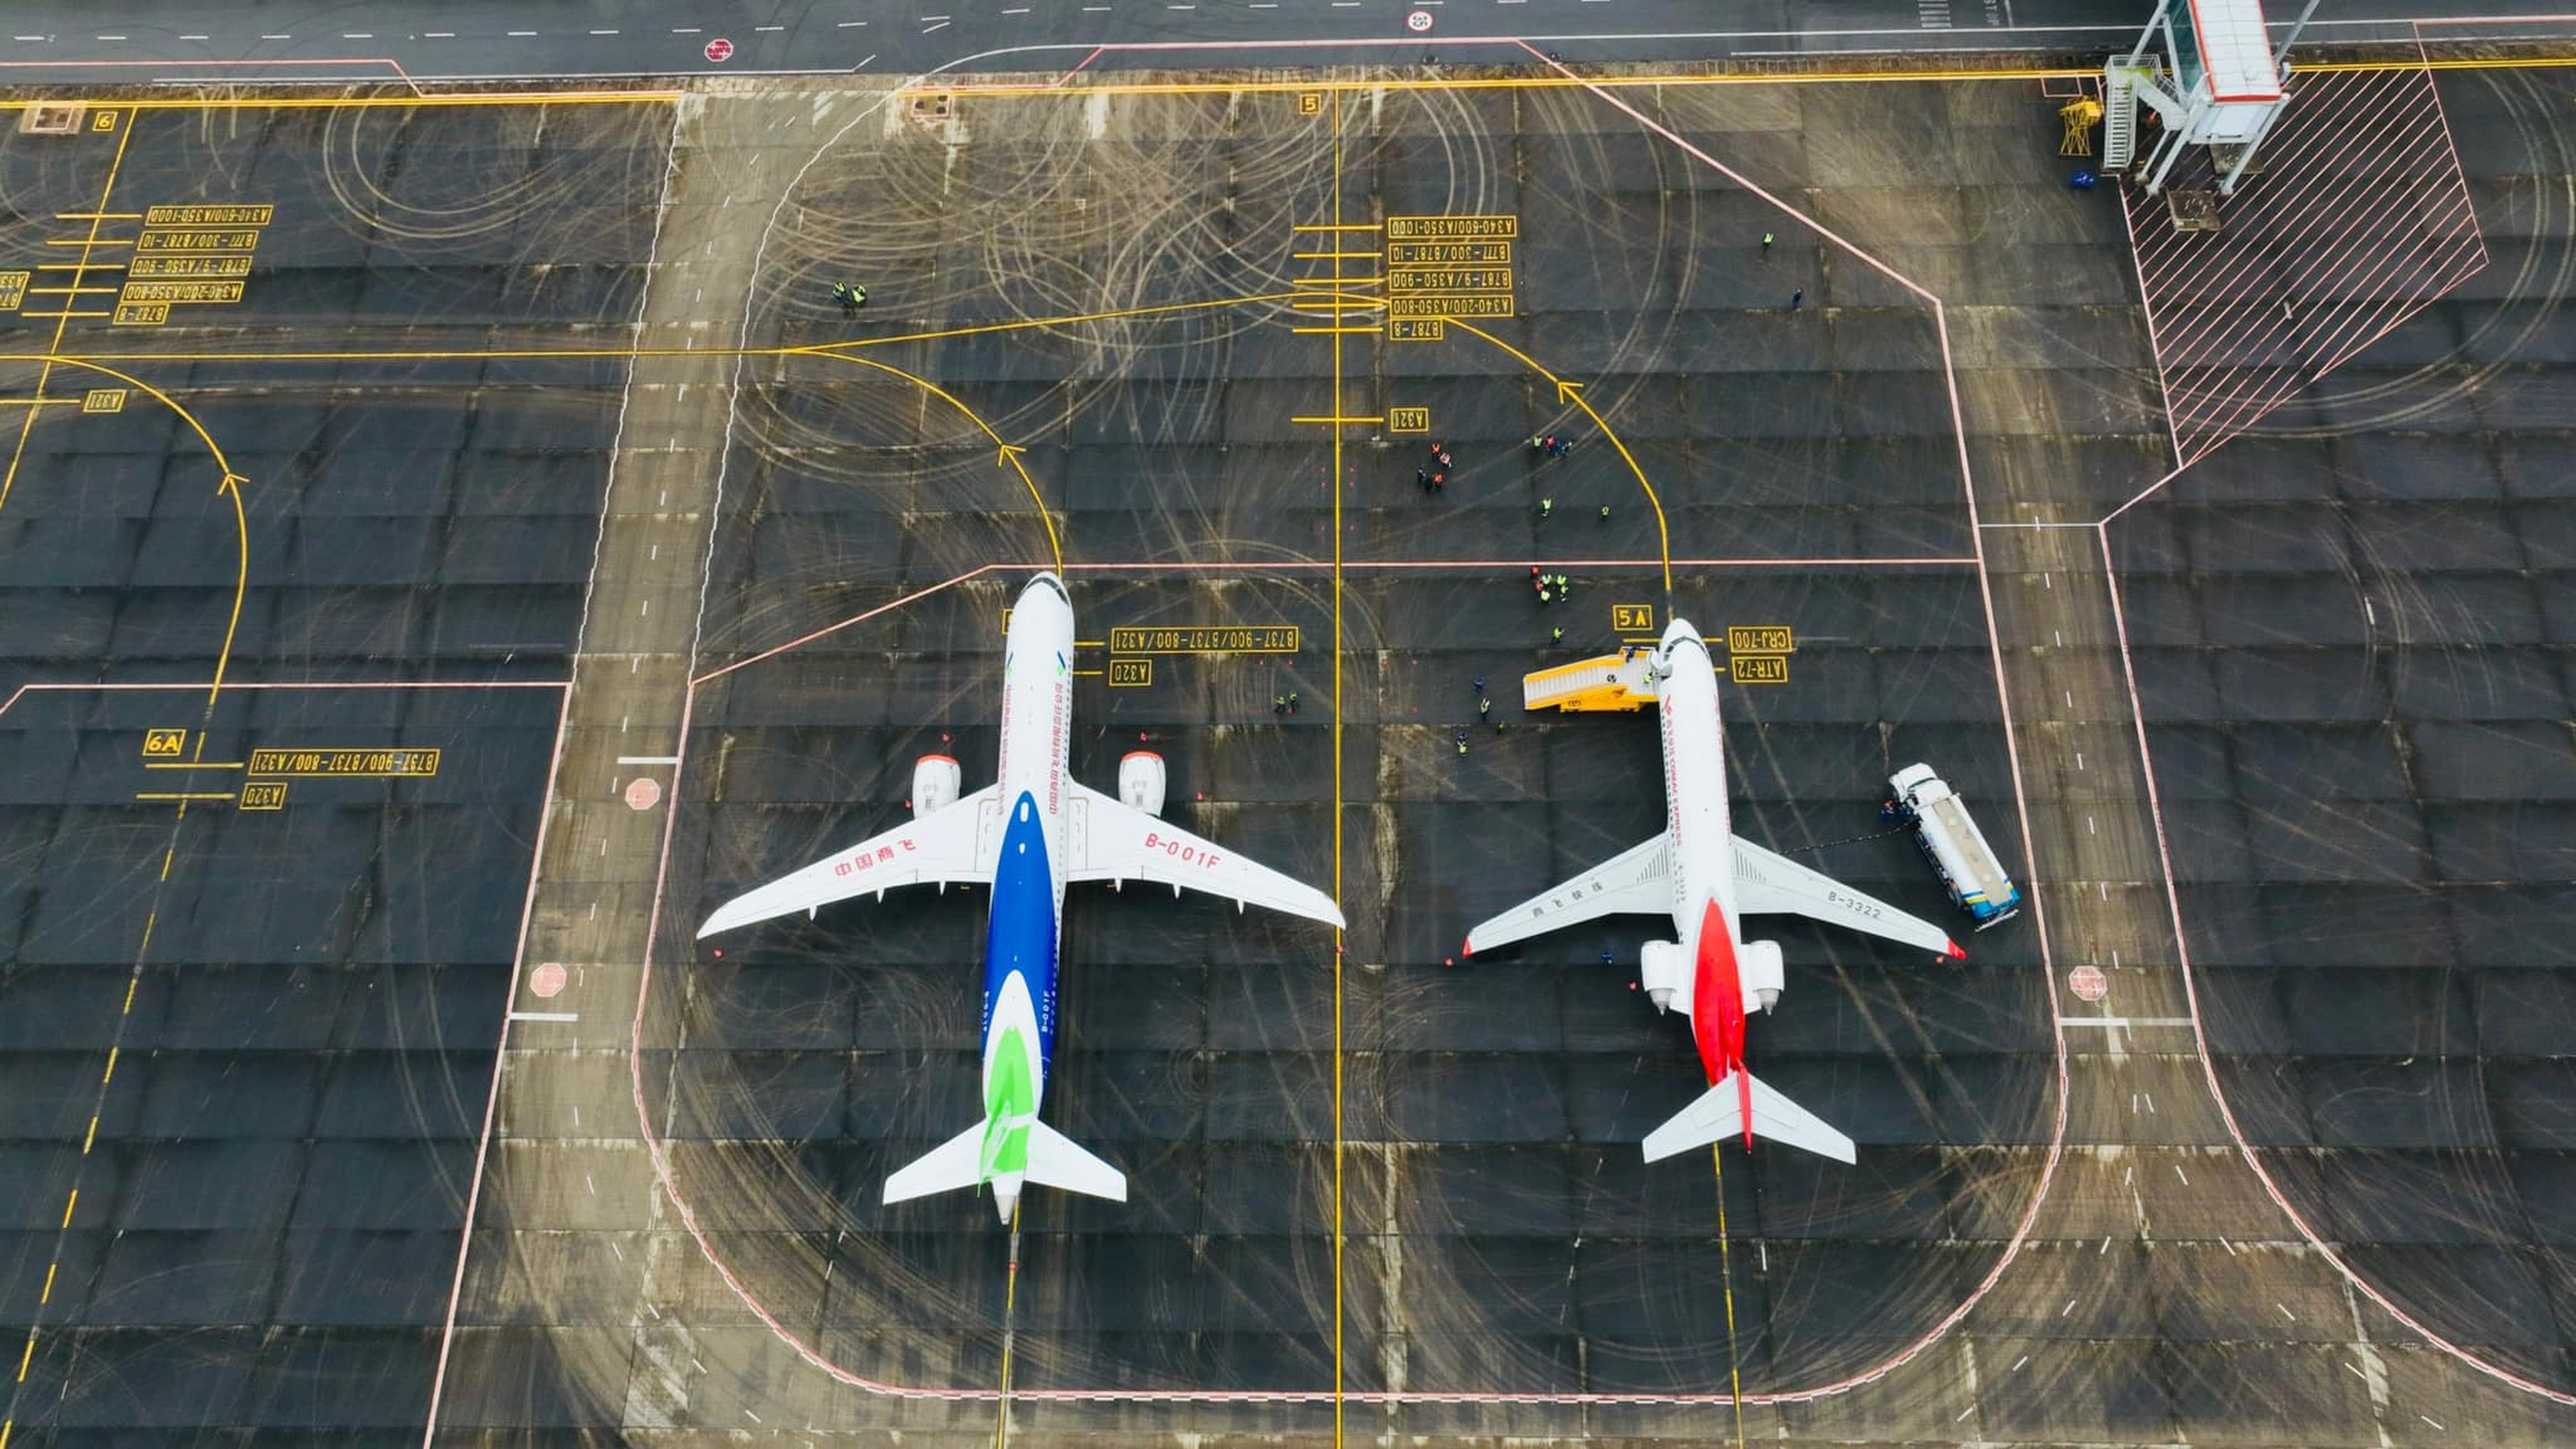 After a year of flights, China’s C919 commercial jet has paved the way for more developments in the country’s aviation industry. Photo: Facebook